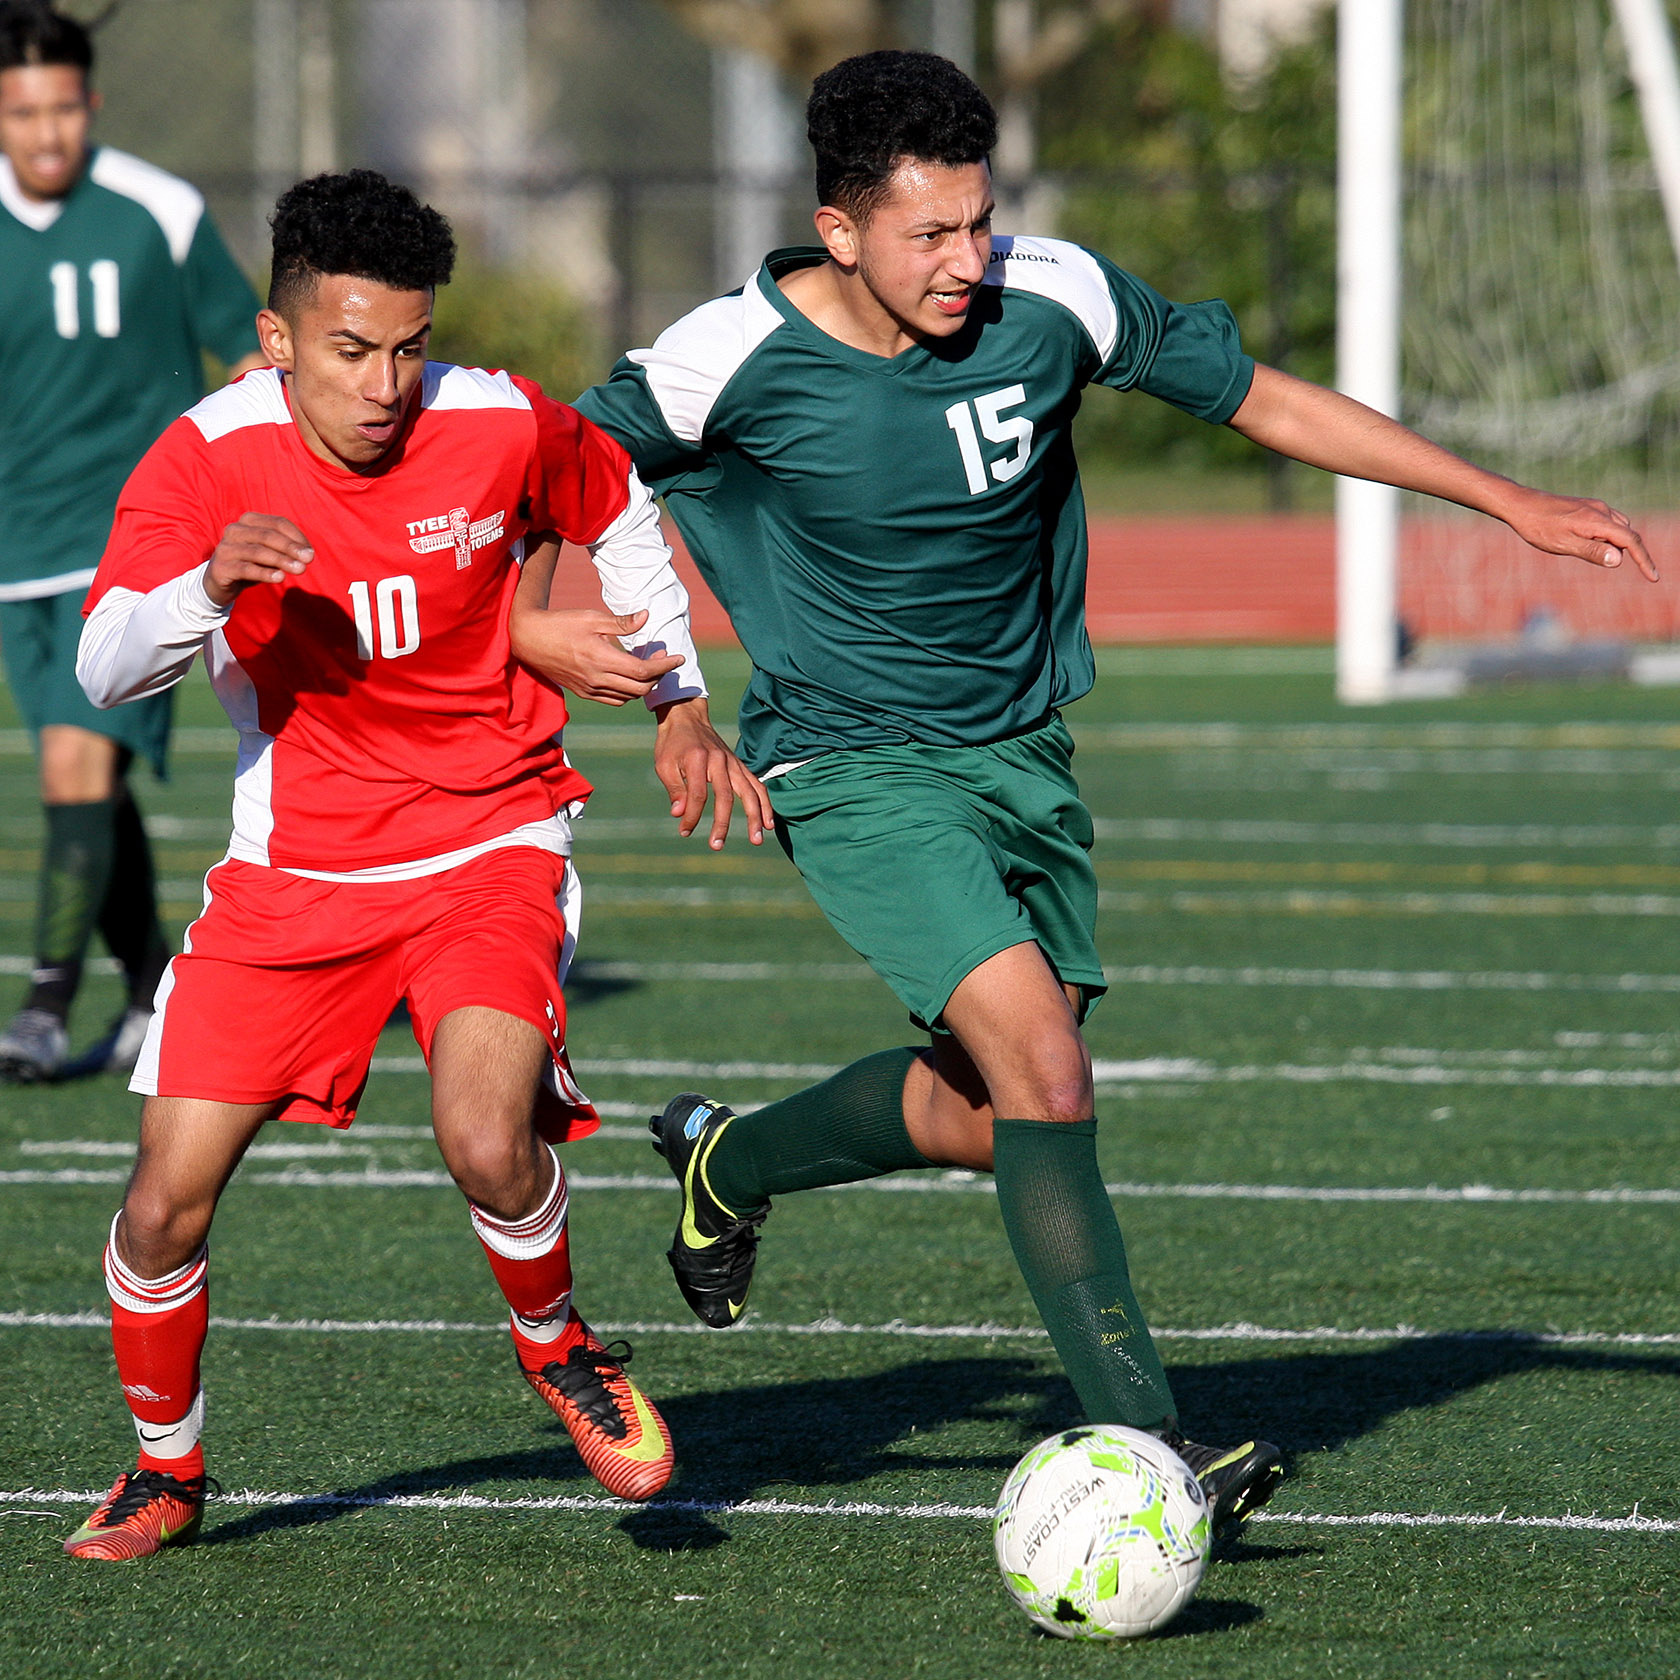 Samuel Tessema of Tyee and Evergreen's Elias Robles chase down the ball.